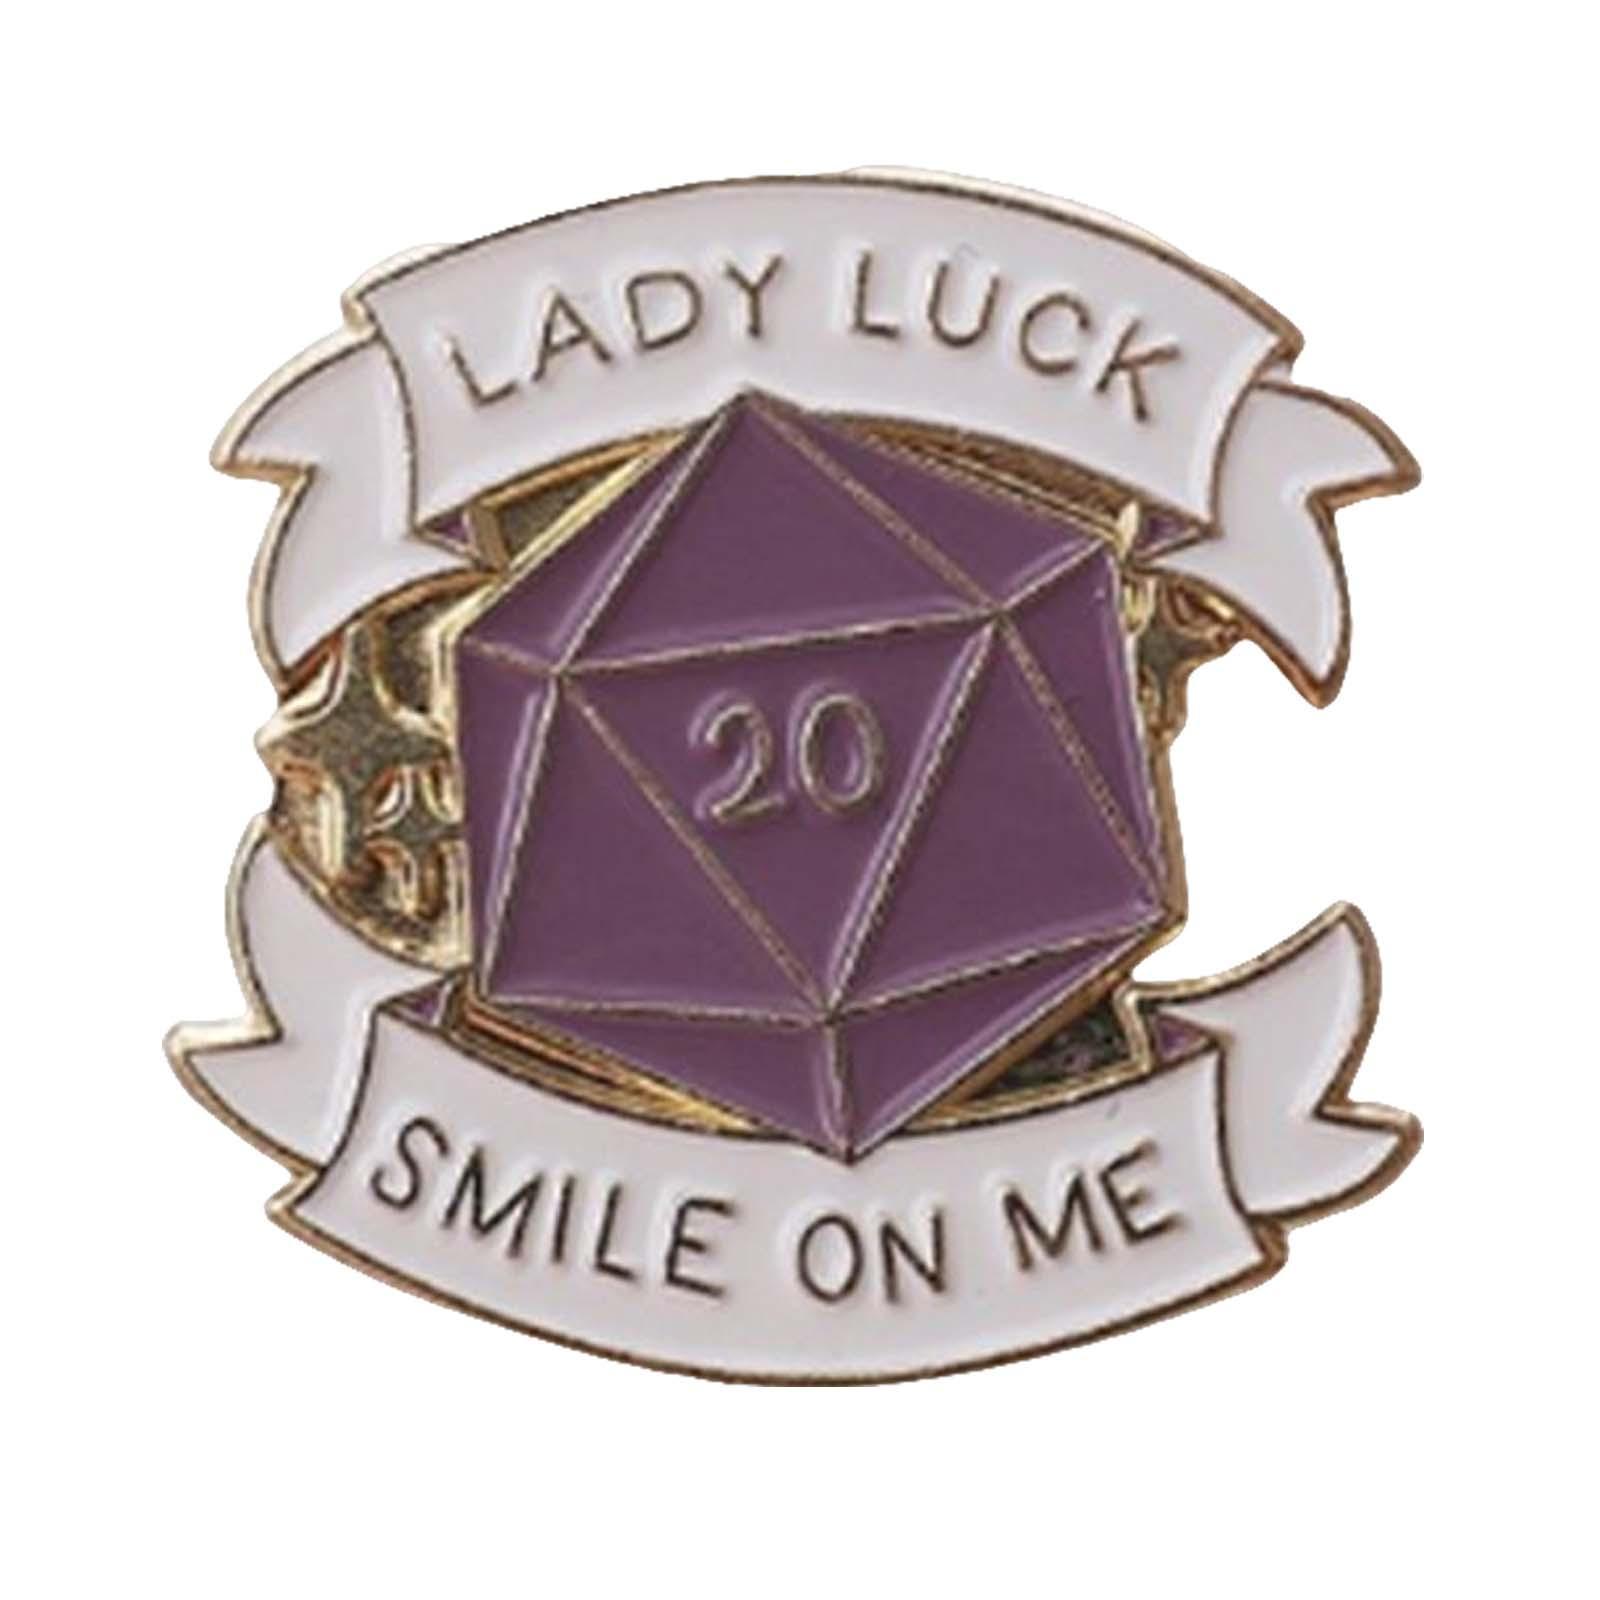 Lady Luck  ME Brooch  Badge Shirt Clothes Decor